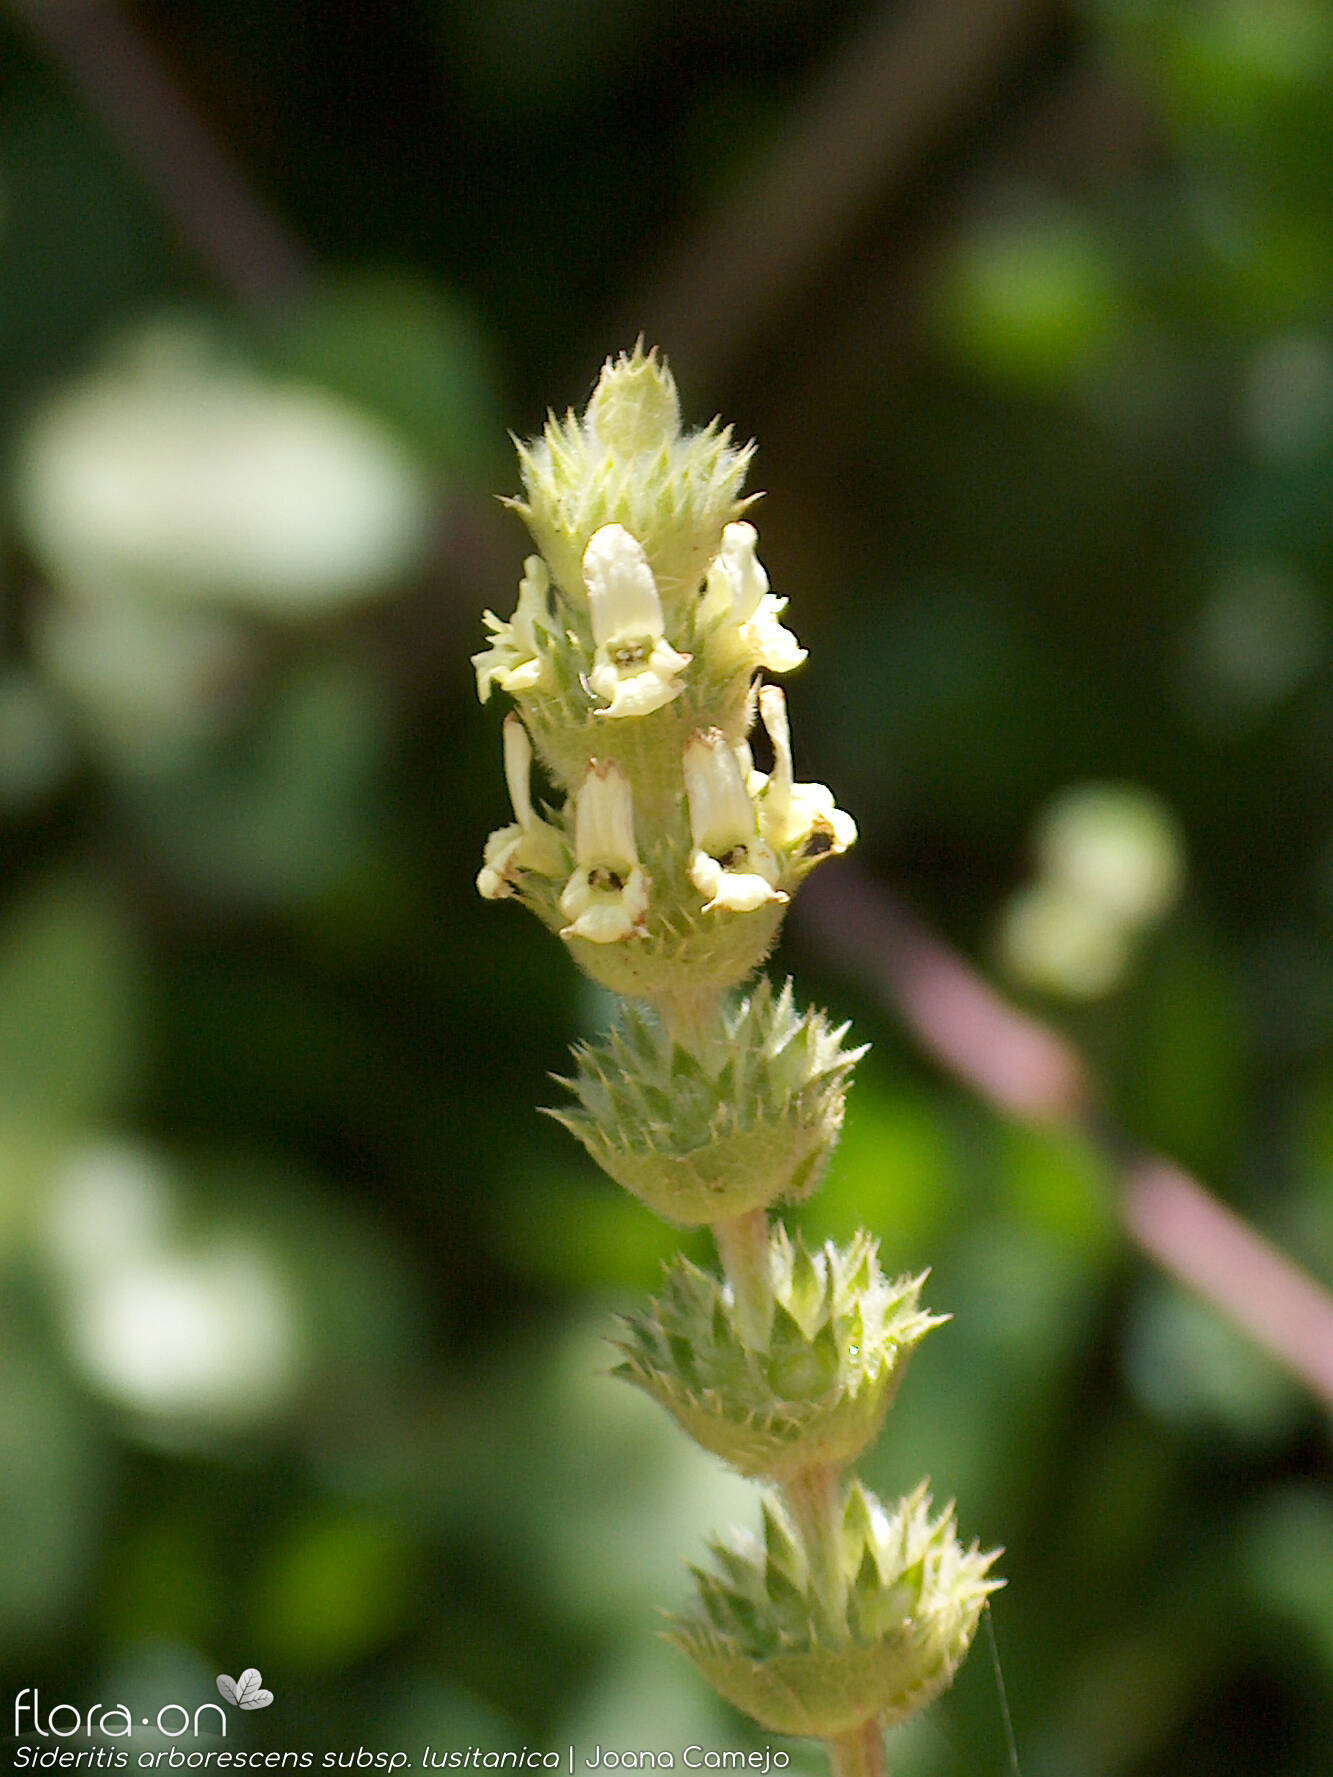 Sideritis arborescens lusitanica - Flor (geral) | Joana Camejo; CC BY-NC 4.0